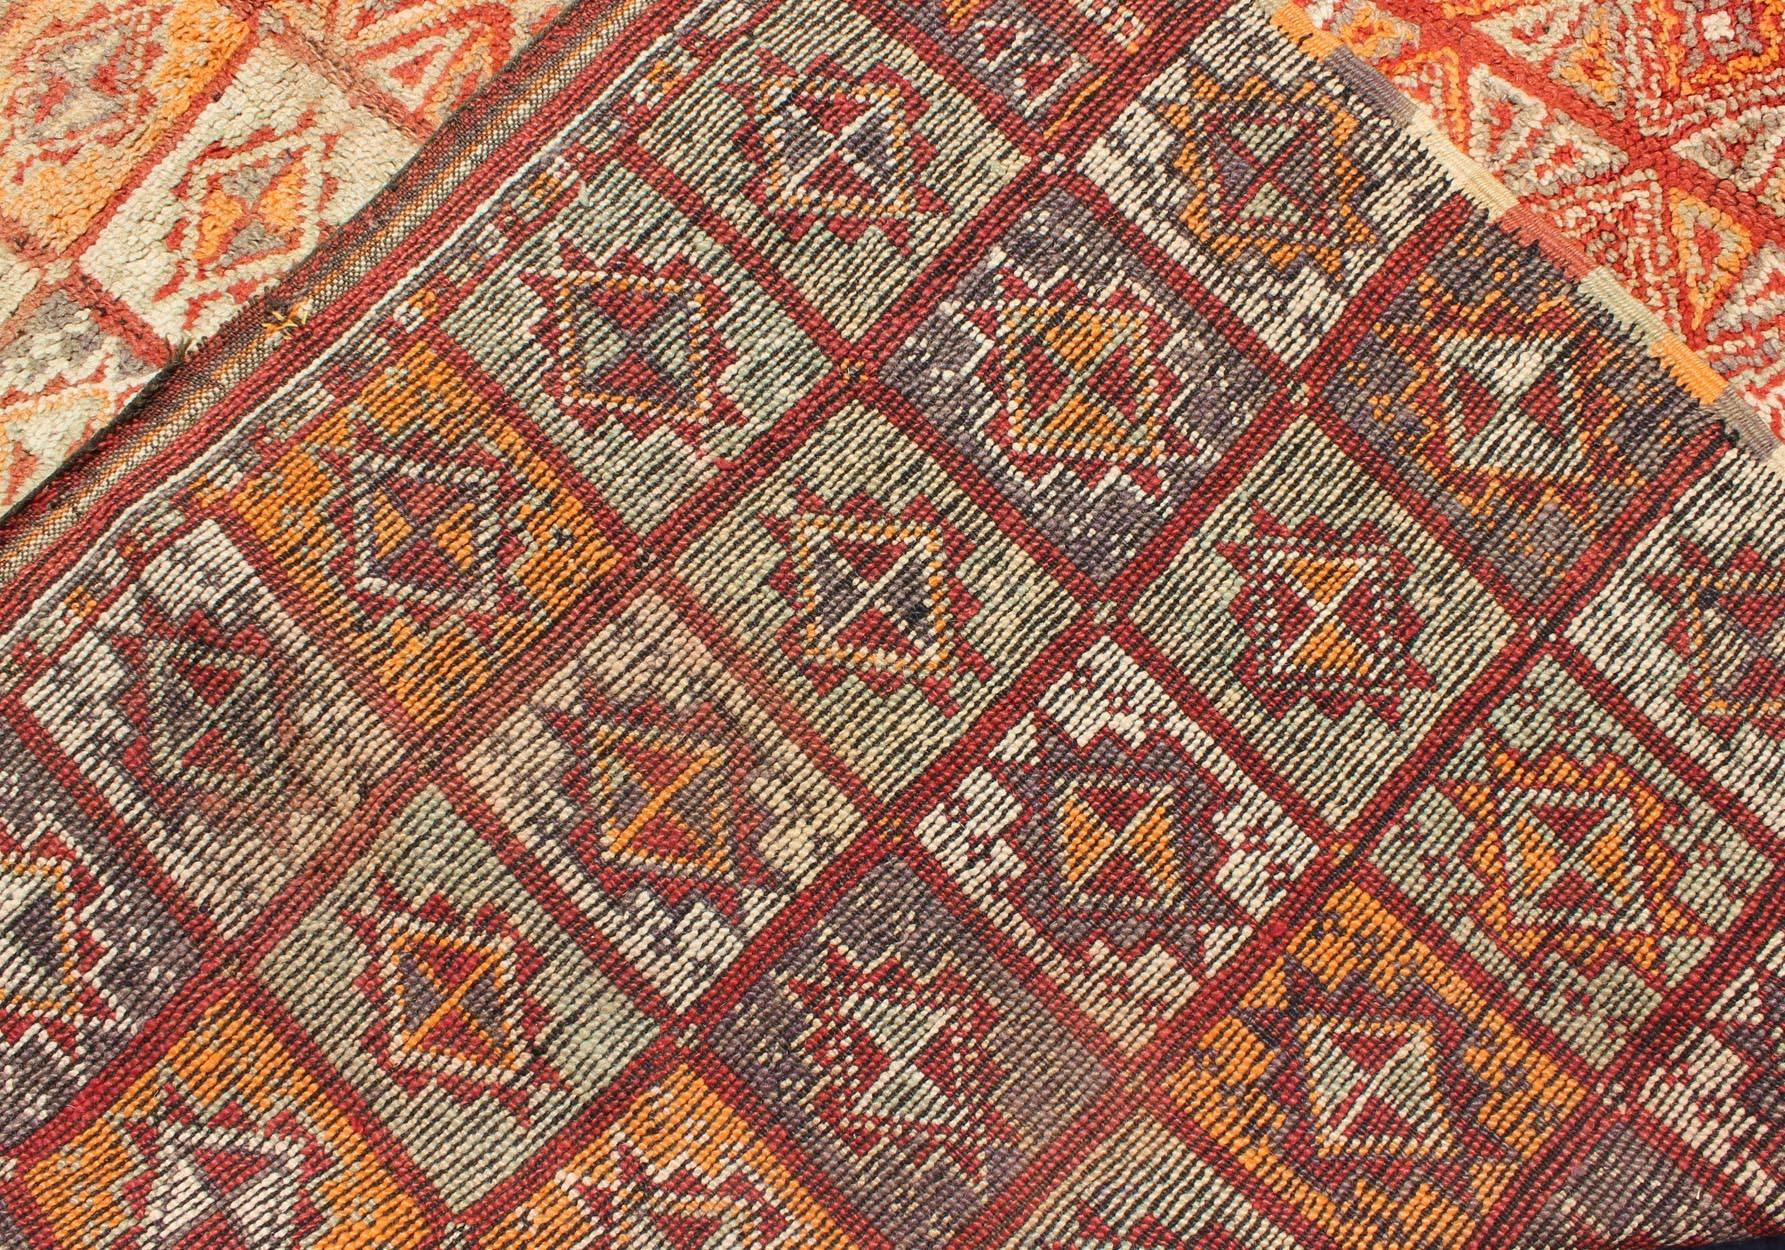 Vintage Moroccan Rug in Autumn Colors, Red, Pumpkin, Orange and Light Green For Sale 1